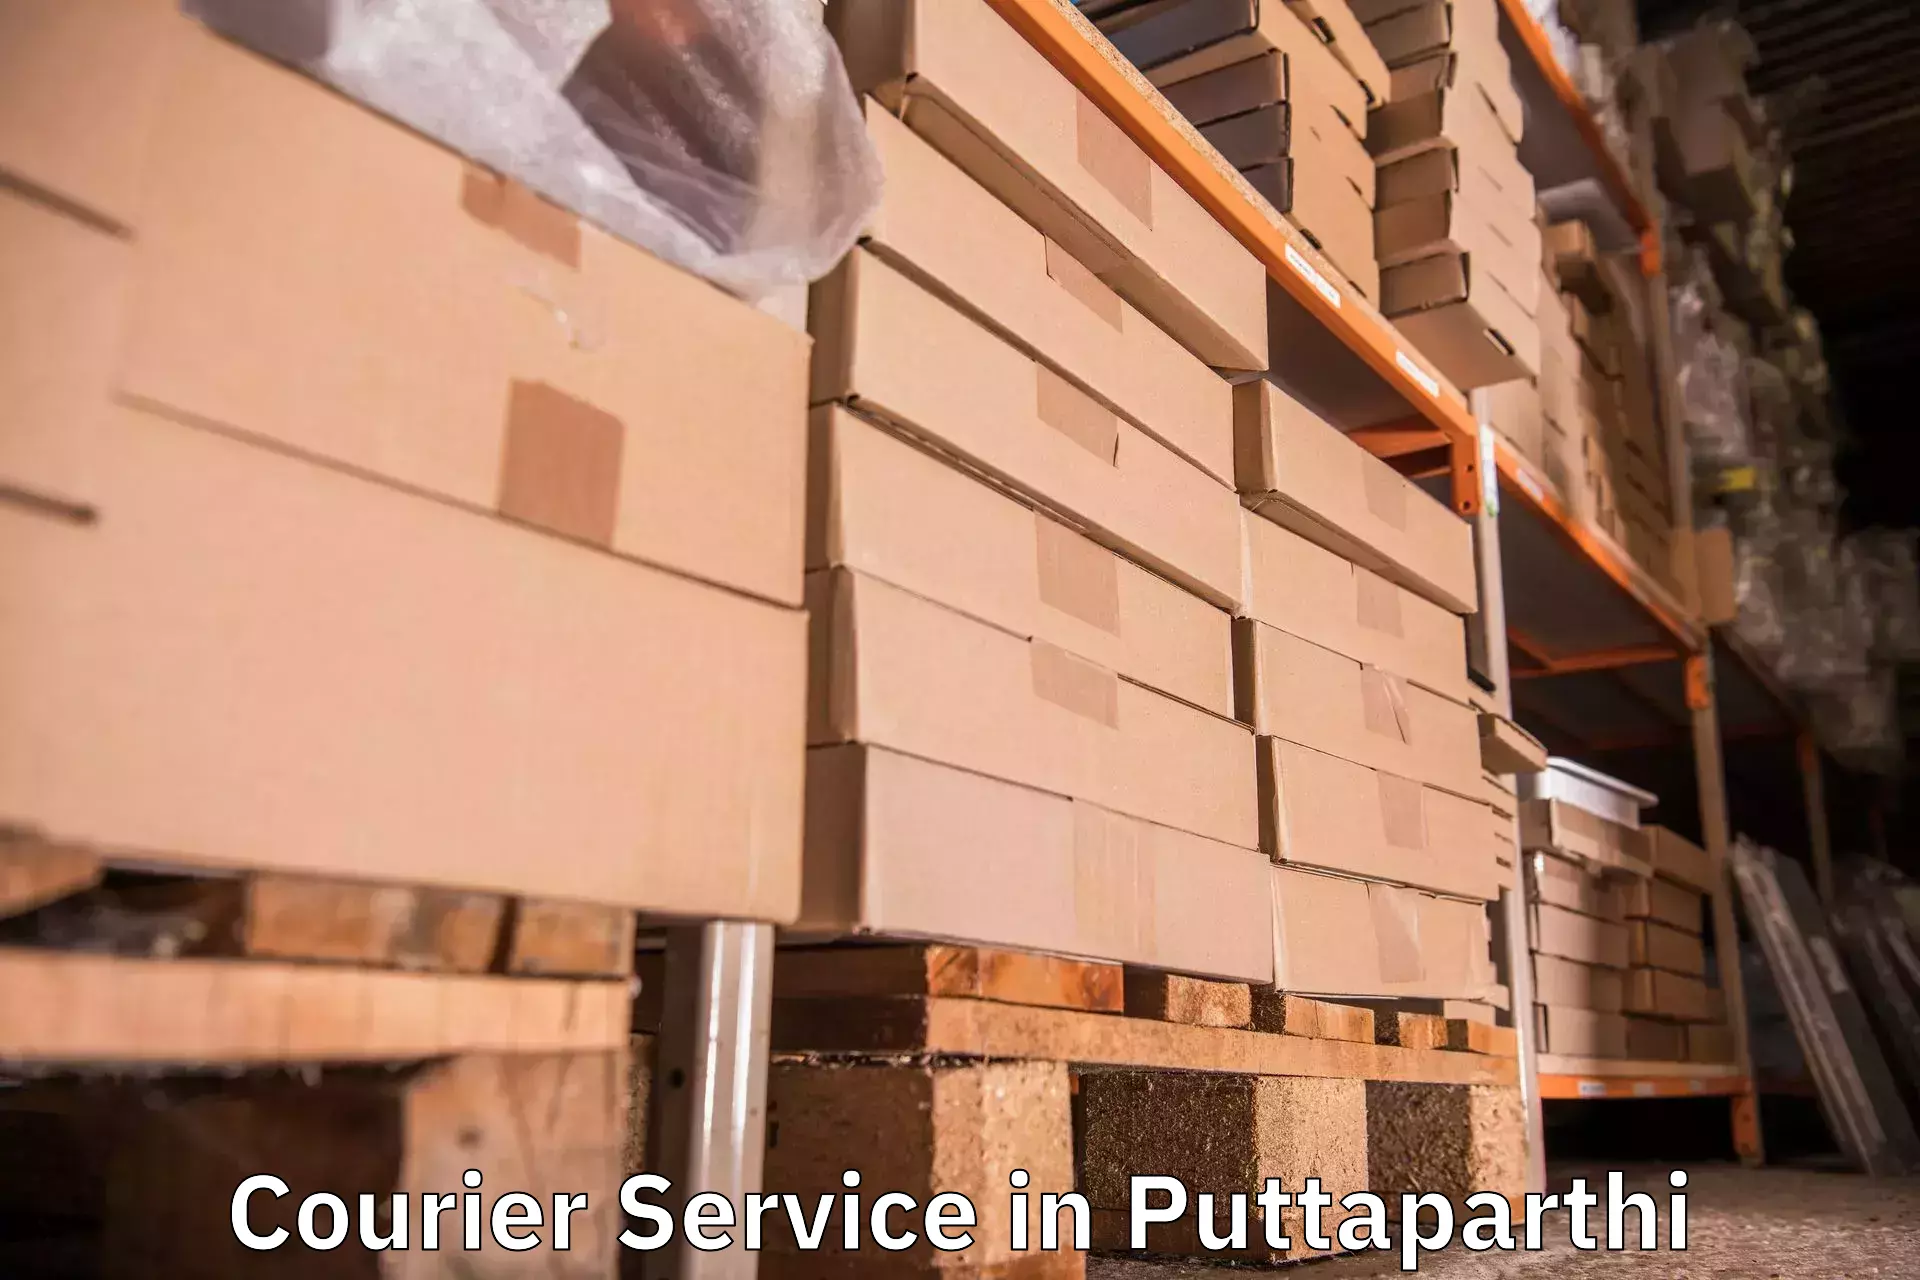 Advanced shipping technology in Puttaparthi